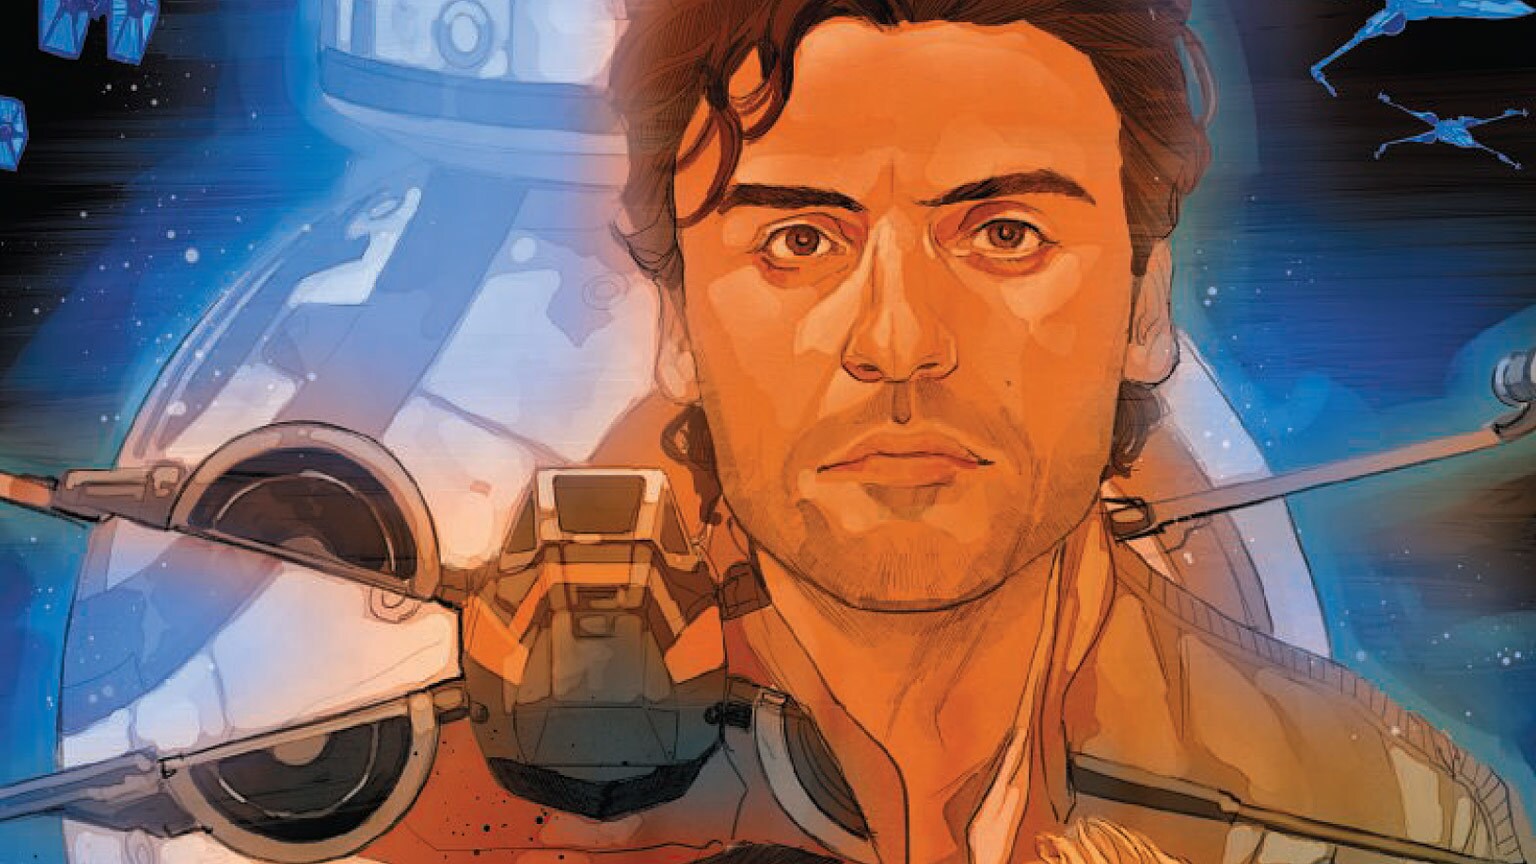 Poe Dameron and his X-wing, as illustrated by Phil Noto for a comic book cover.